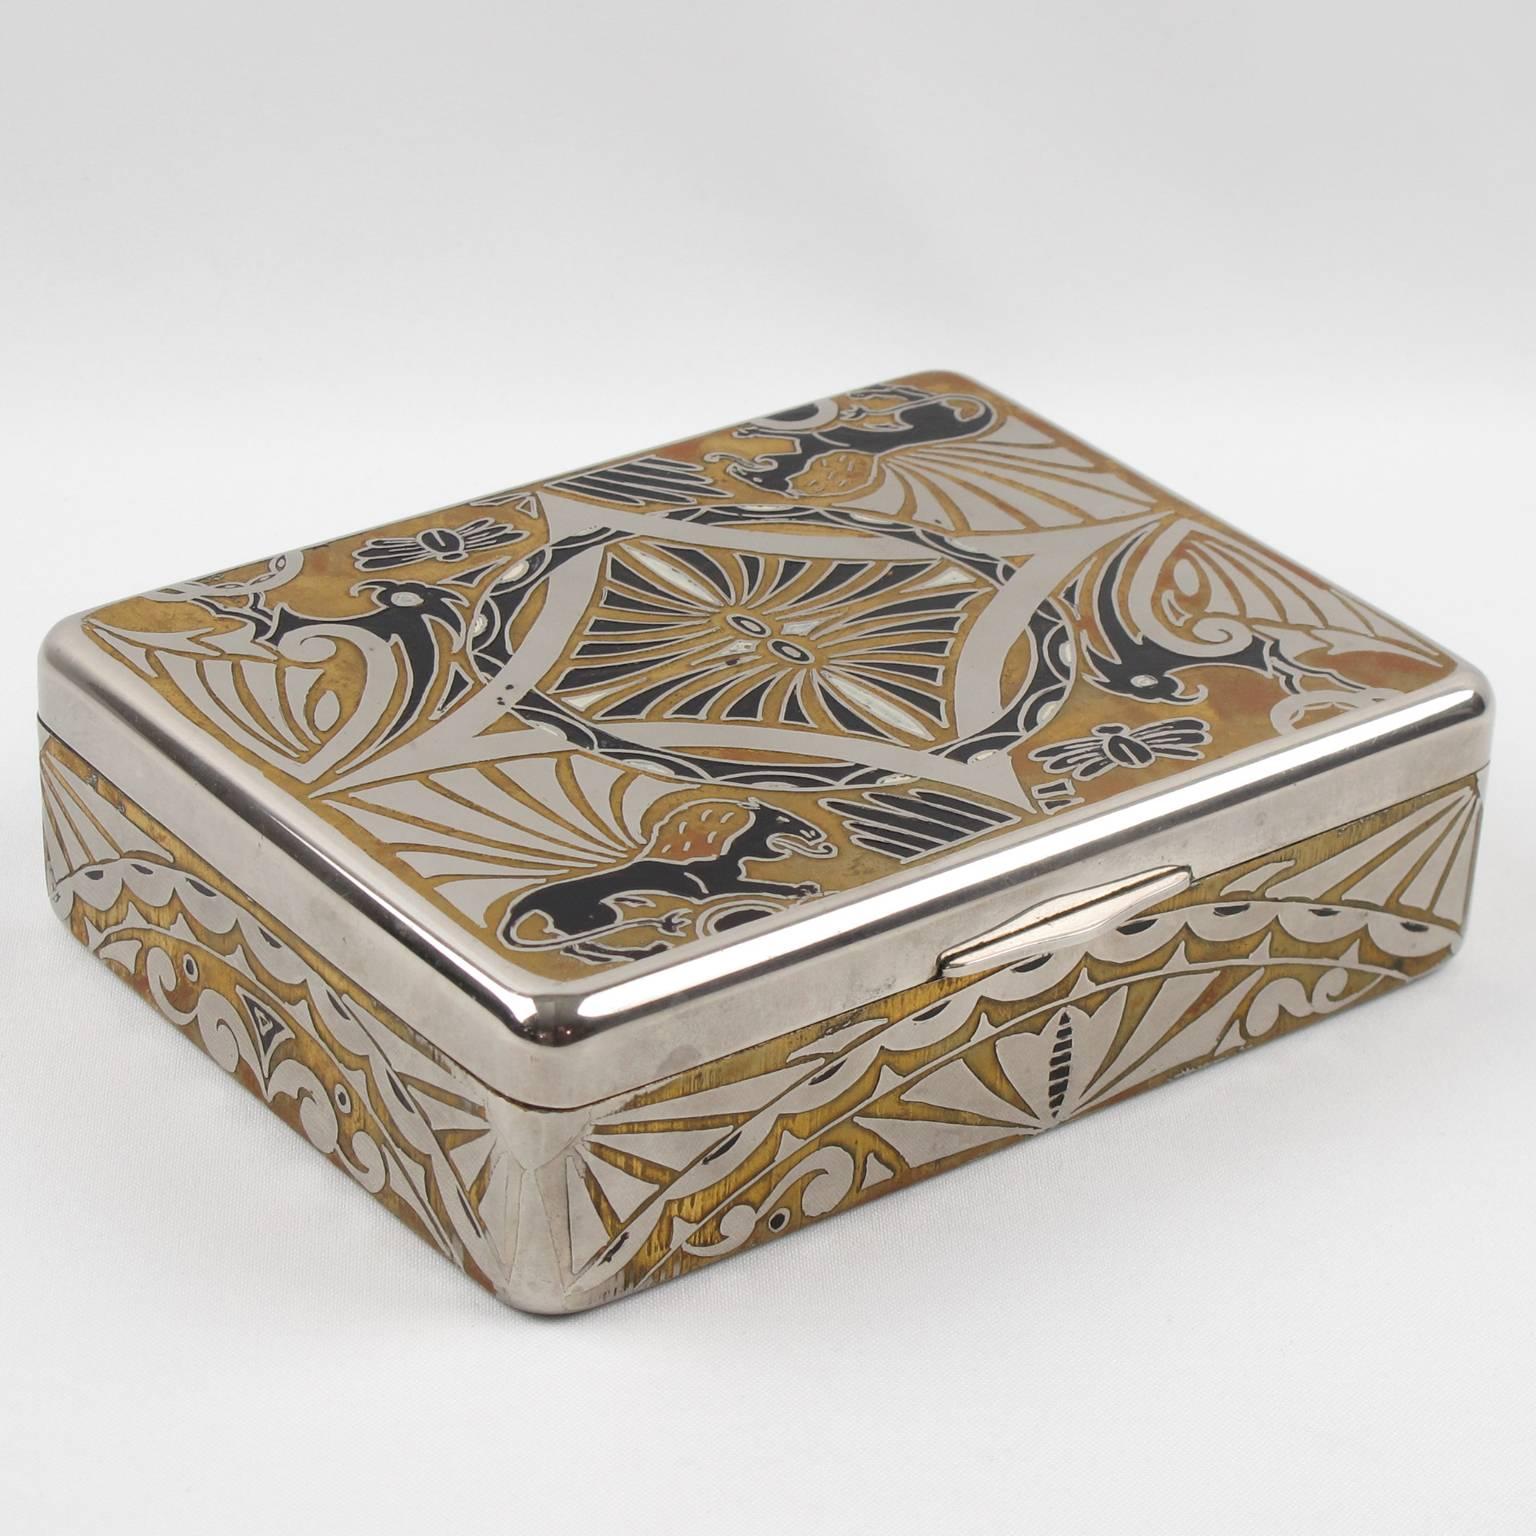 Rare vintage early 20th century brass and chrome lidded decorative box with inlaid design. Square shape with elegant modernist Jugendstil design. Polished chrome and gilt brass inlaid featuring stylized floral design with animal (lion, eagle, bee)